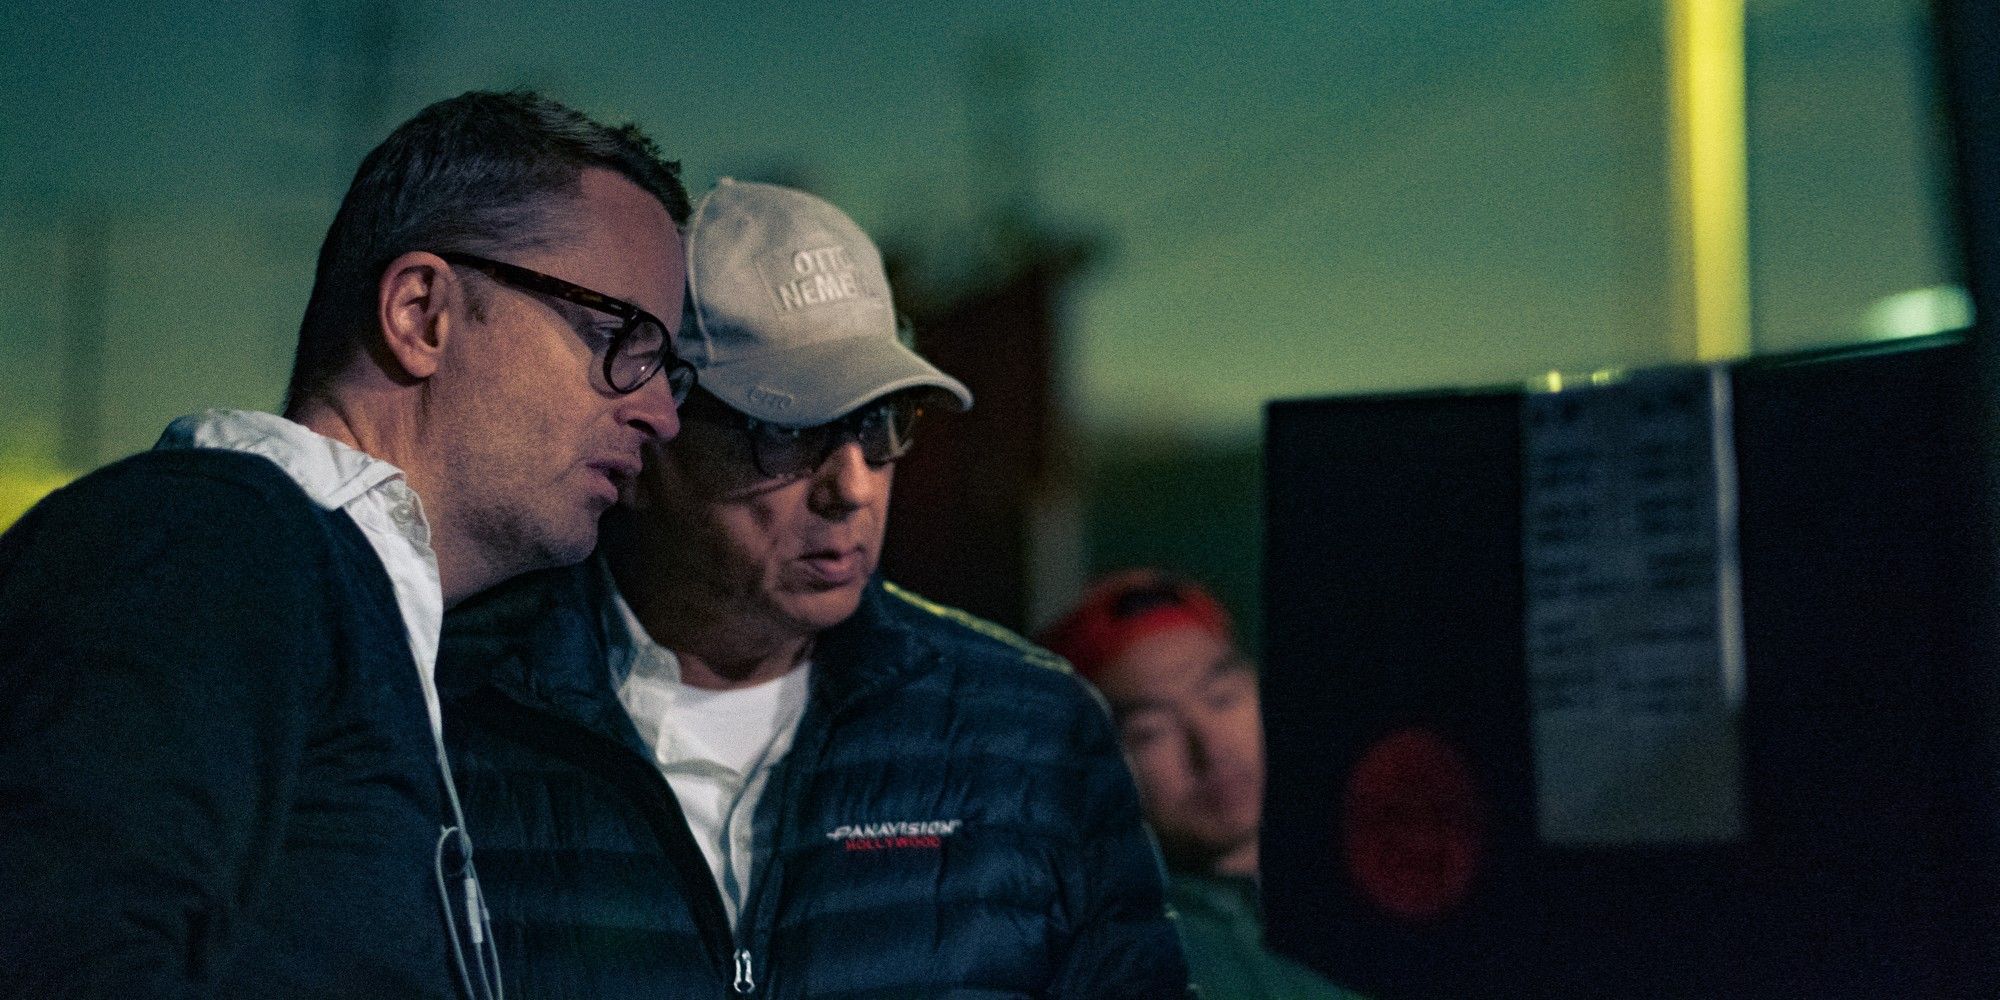 Nicolas Winding Refn on the Too Old to Die Young set